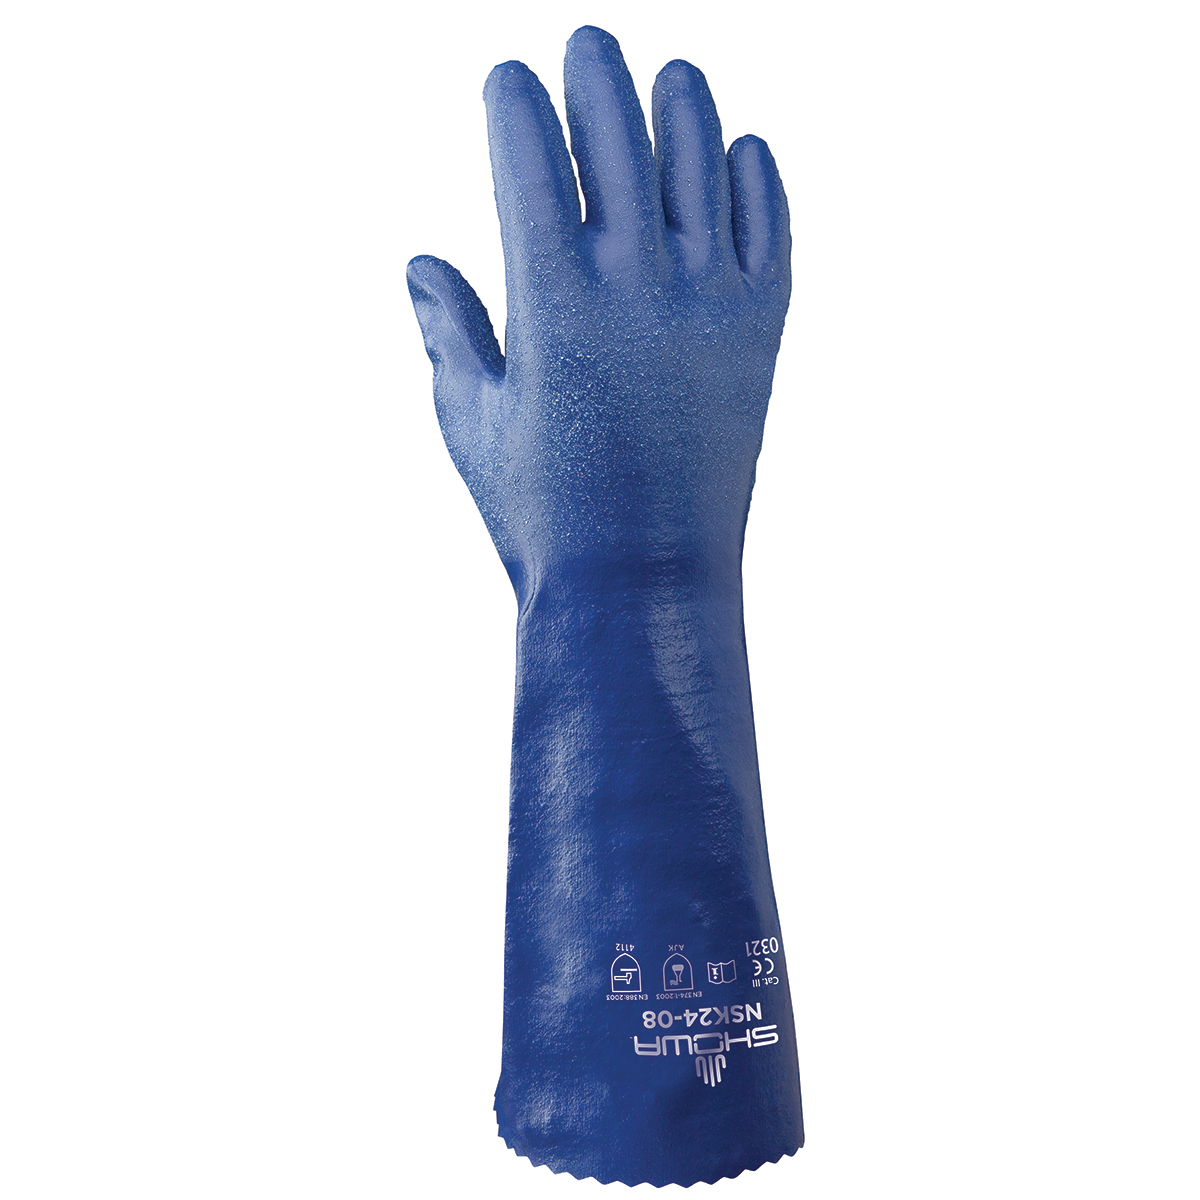 SHOWA® Size 11 Blue Cotton Lined Nitrile Chemical Resistant Gloves